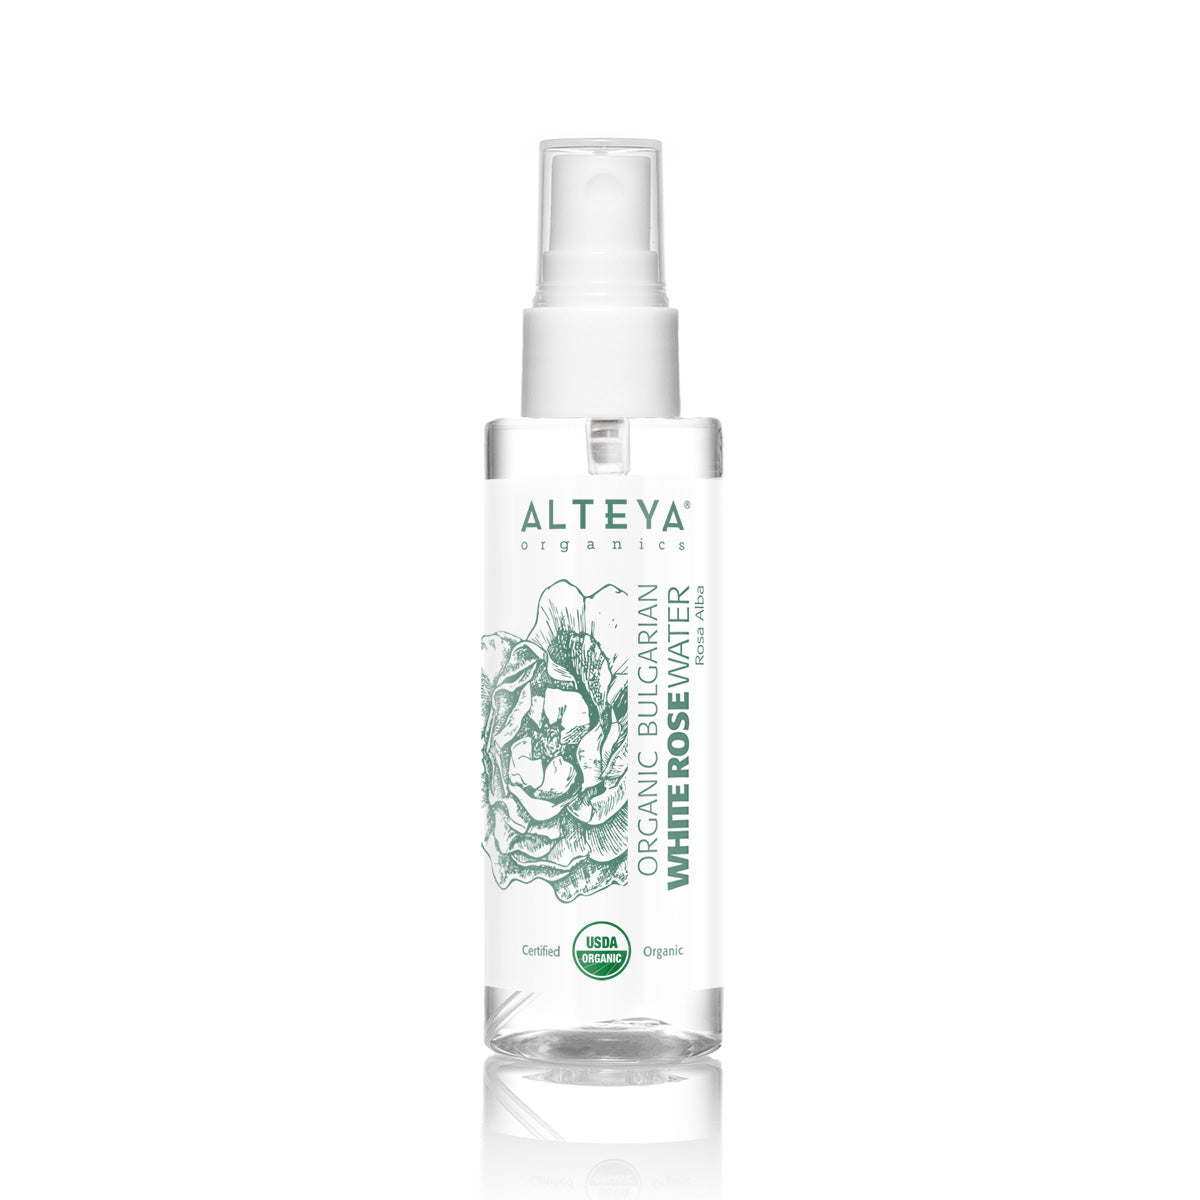 Alteya’s 100% pure, steam distilled white rose water is made of fresh, organic Rosa Alba blossoms, one of the rarest oil-bearing roses. As compared to our pink Rosa Damascena water, this one has lighter and more delicate floral aroma. It carries all the fragrance complexity of the white Rose Alba. By using a unique distillation technique, which embodies century-old traditions and modern technologies, we distill a special grade white rose flower water that preserves the biodynamic energy of the rose plant. 